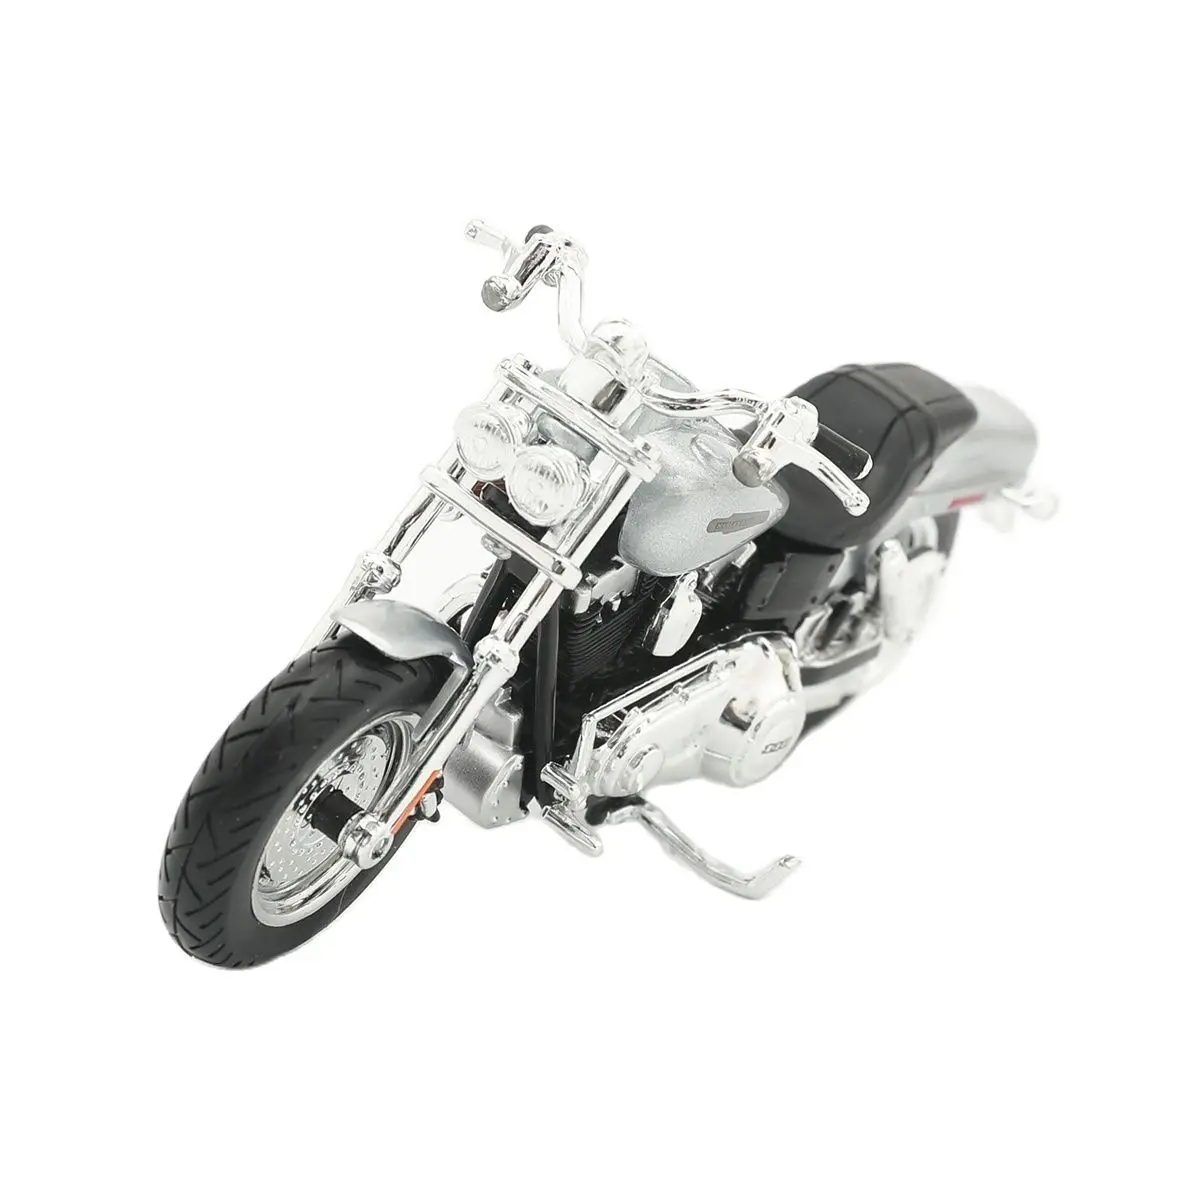 

Maisto 1:18 Harley 2009 FXDFSE CVO Fat Bob Alloy Motorcycle Diecast Bike Car Model Toy Collection Mini Moto Gift